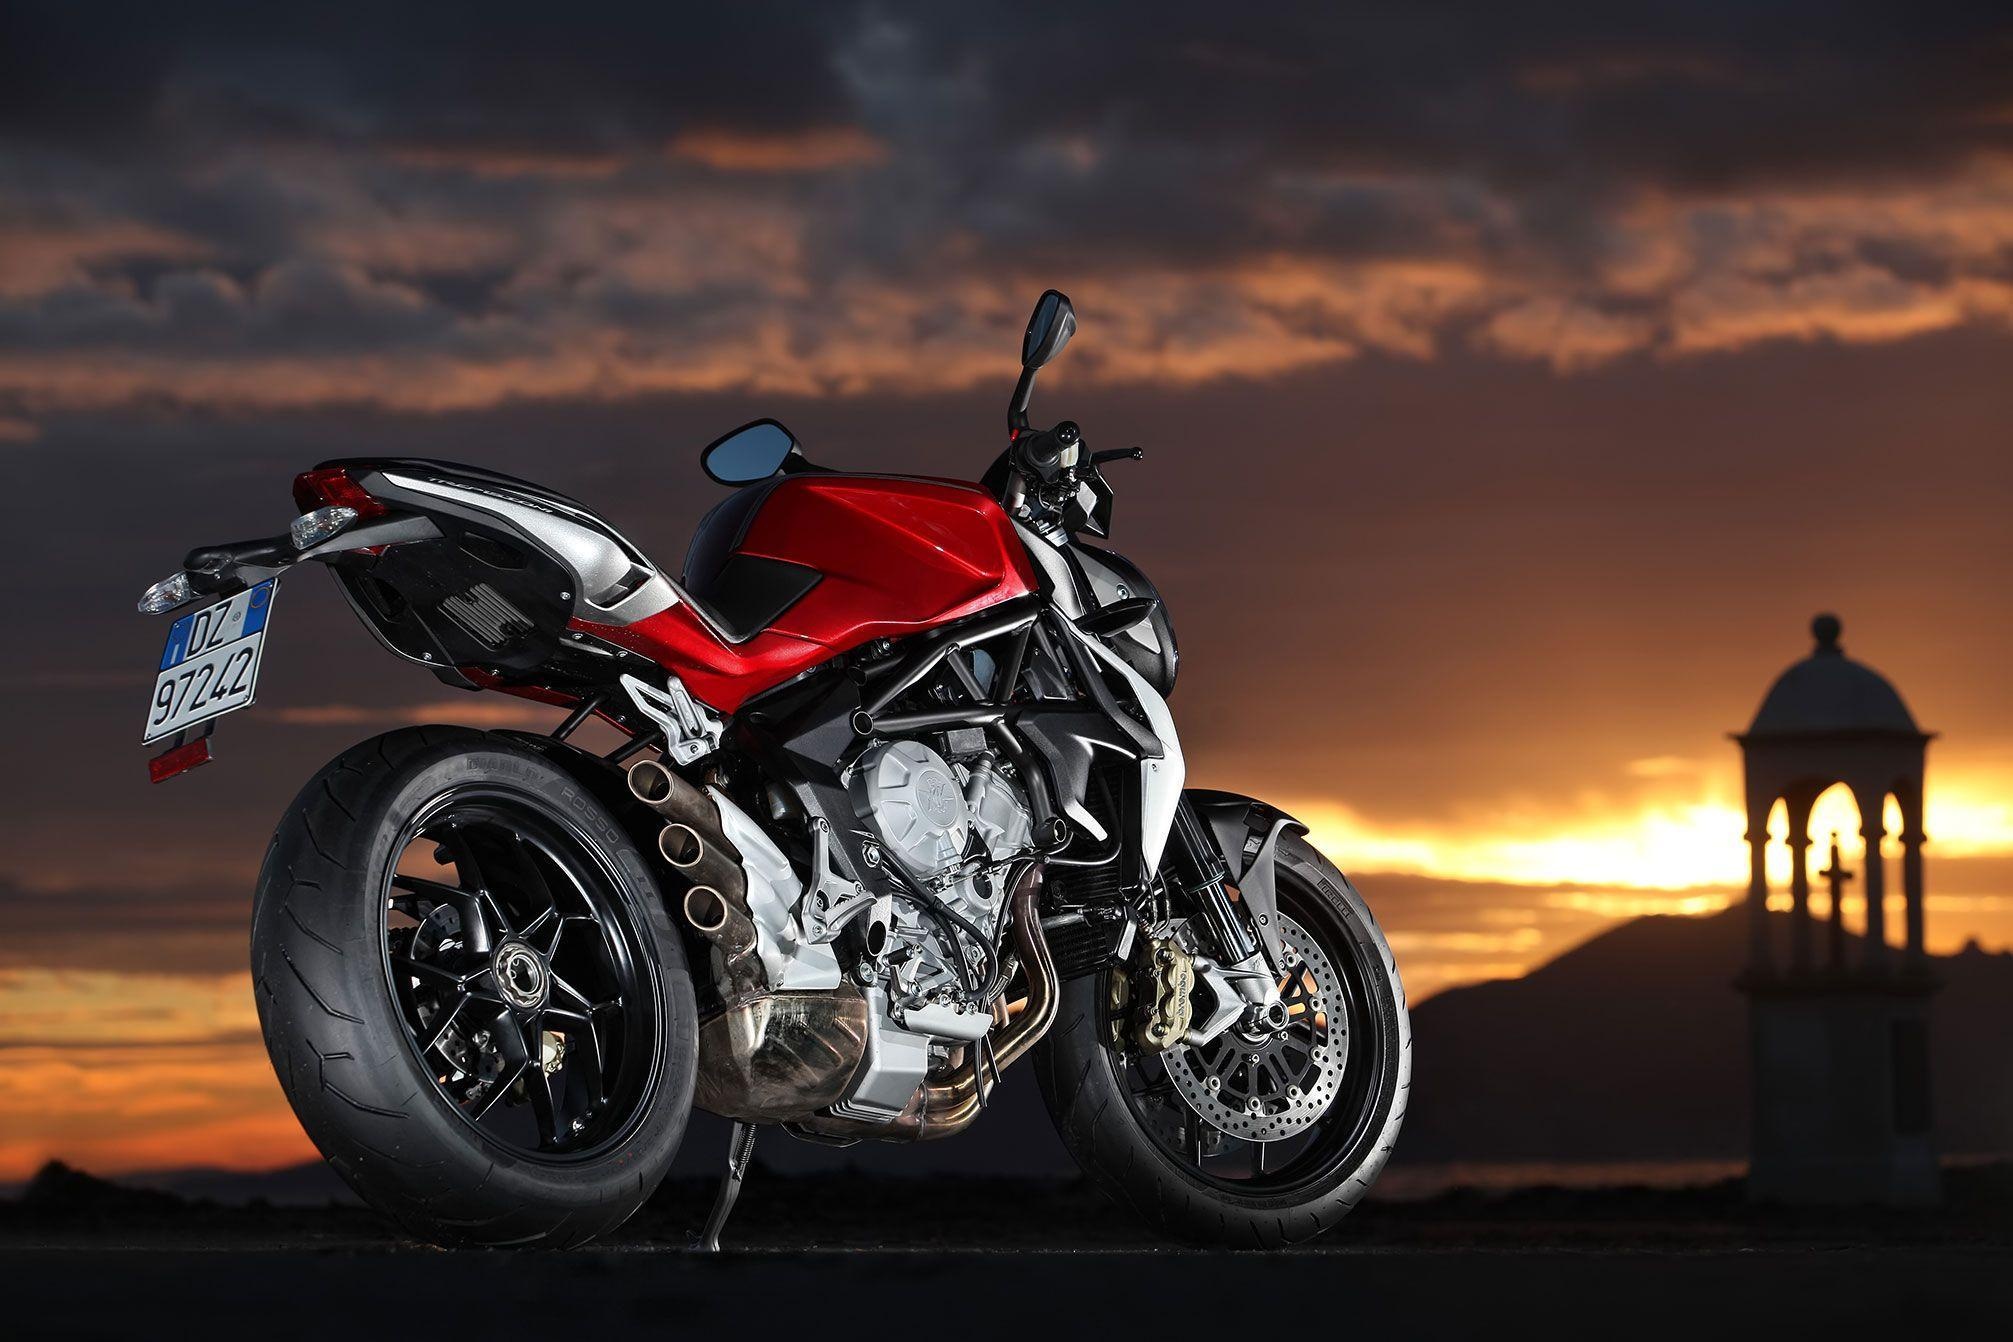 MV Agusta Brutale Rosso, Stunning MV Agusta, Exciting backgrounds, Dragster allure, 2020x1350 HD Desktop